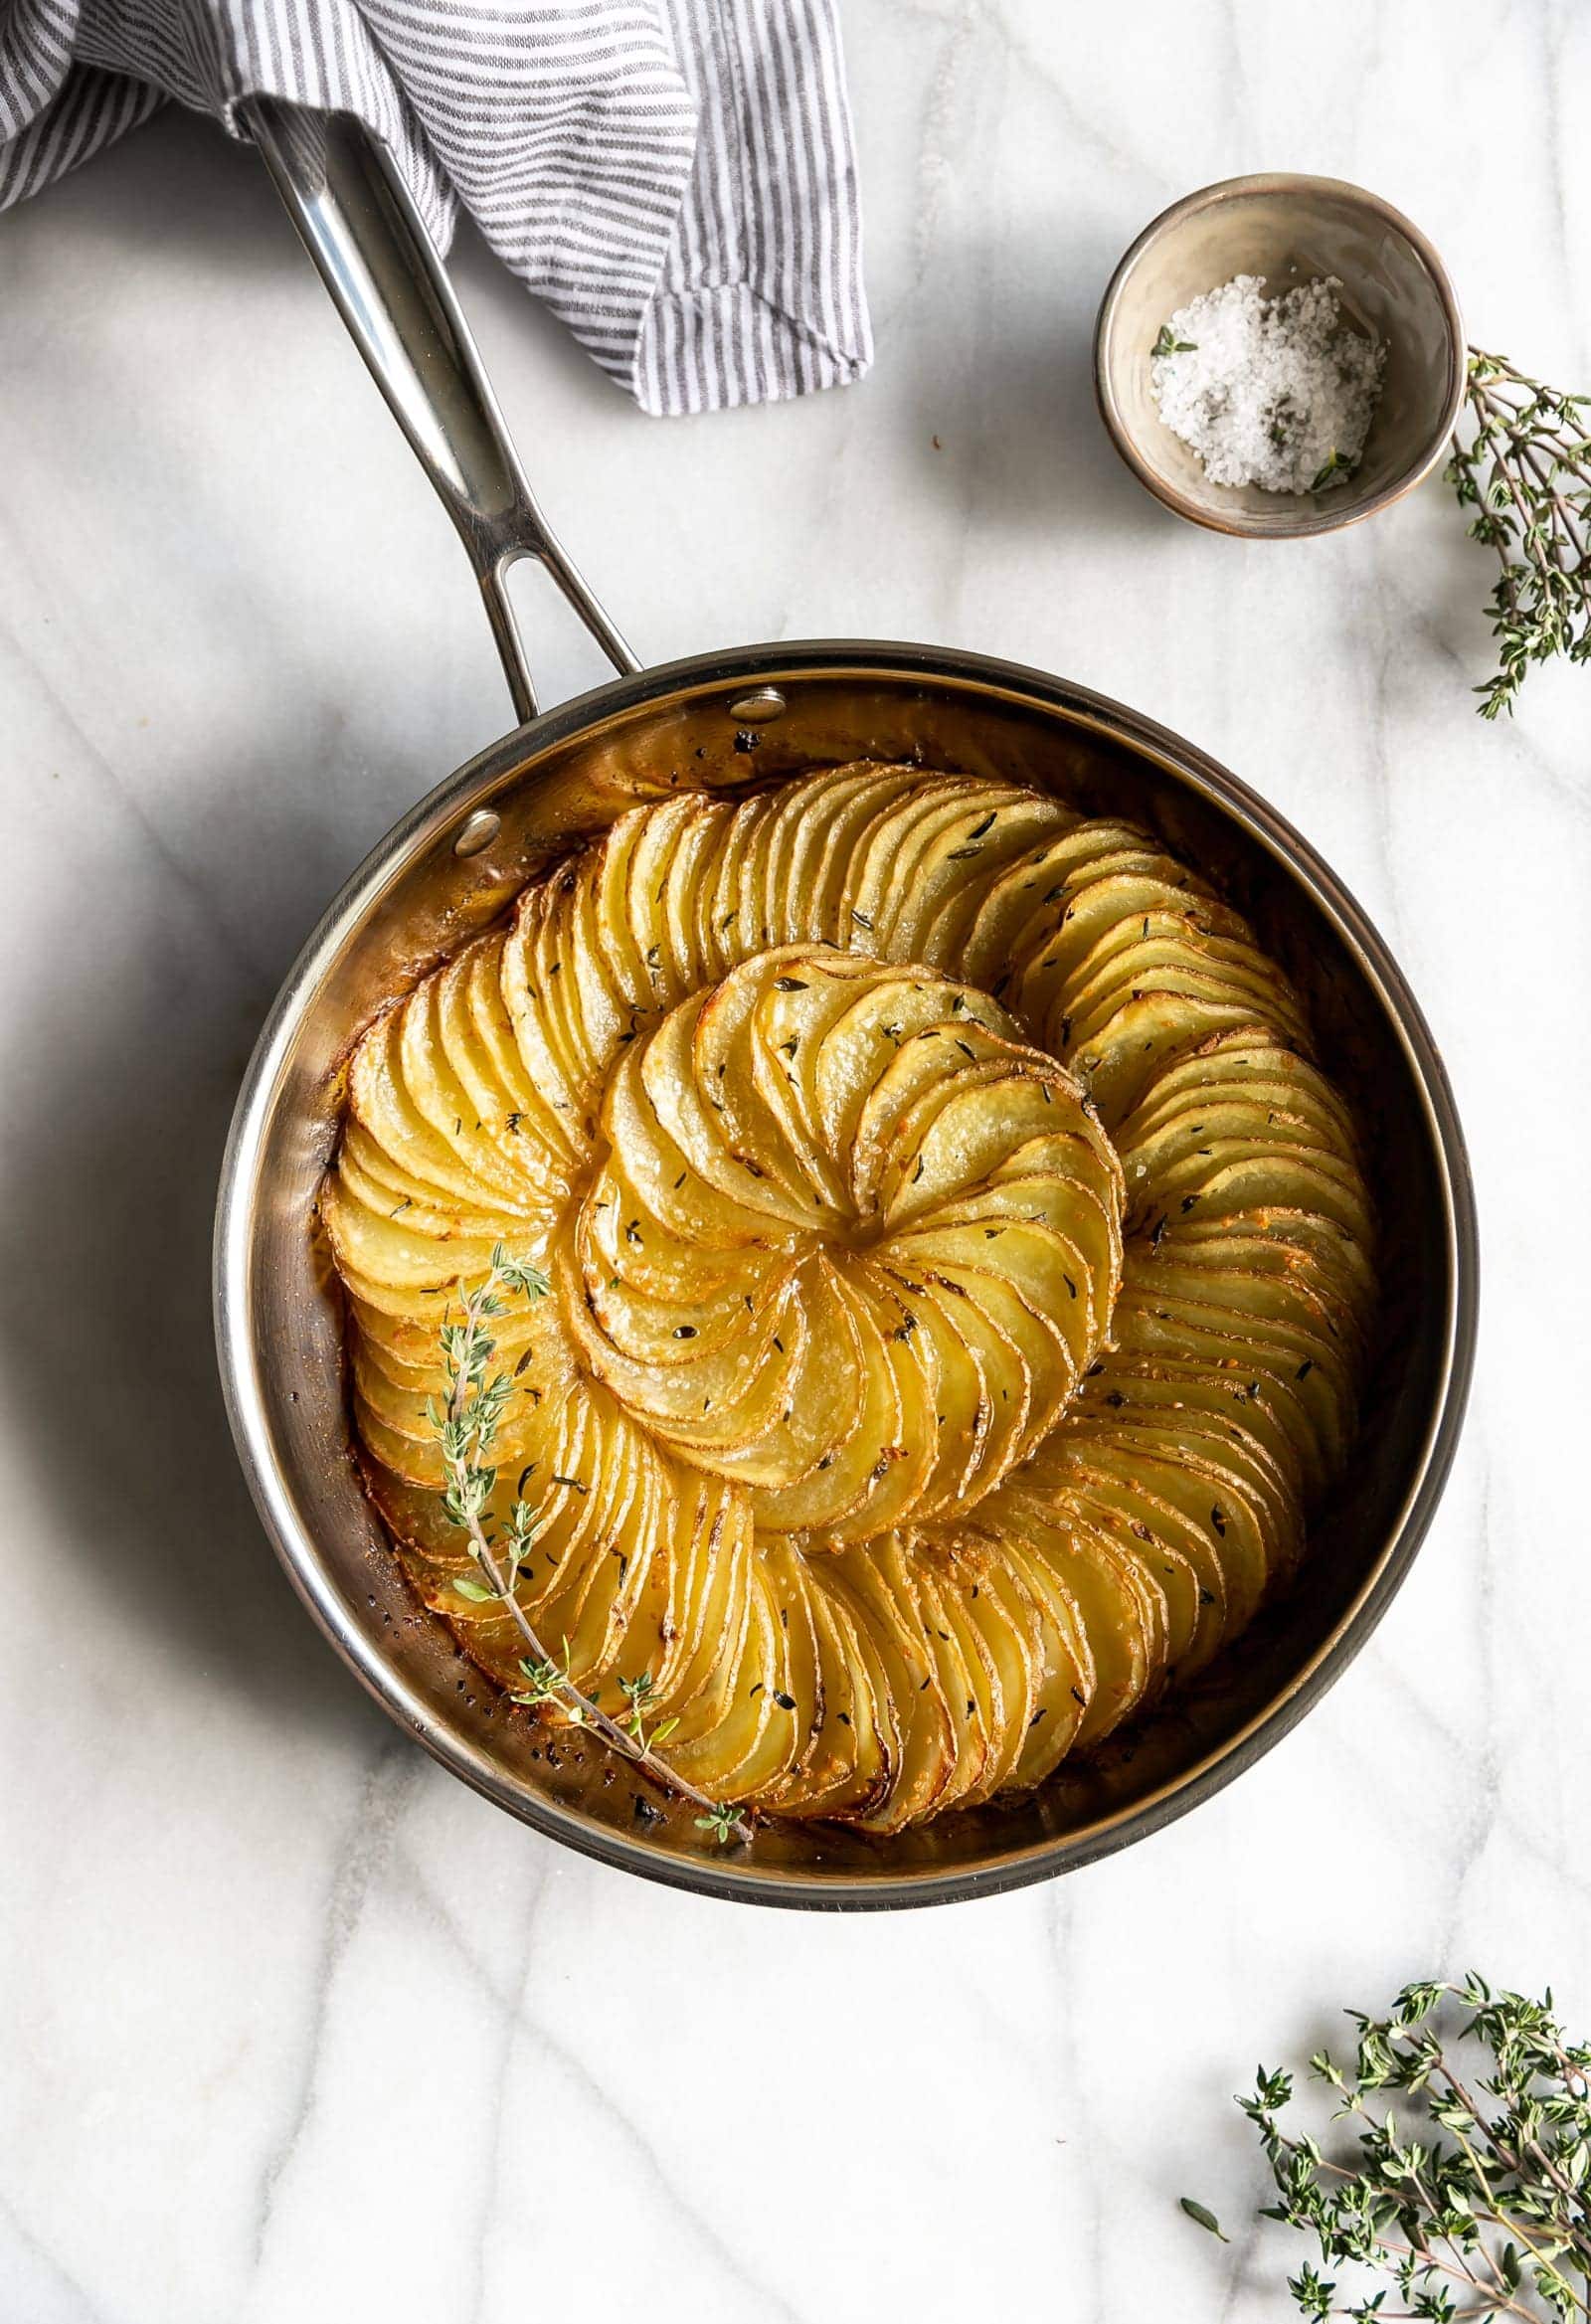 Thinly sliced gold potatoes tossed in garlic, butter, and thyme then roasted to perfection. An easy 5-ingredient side dish for any occasion!